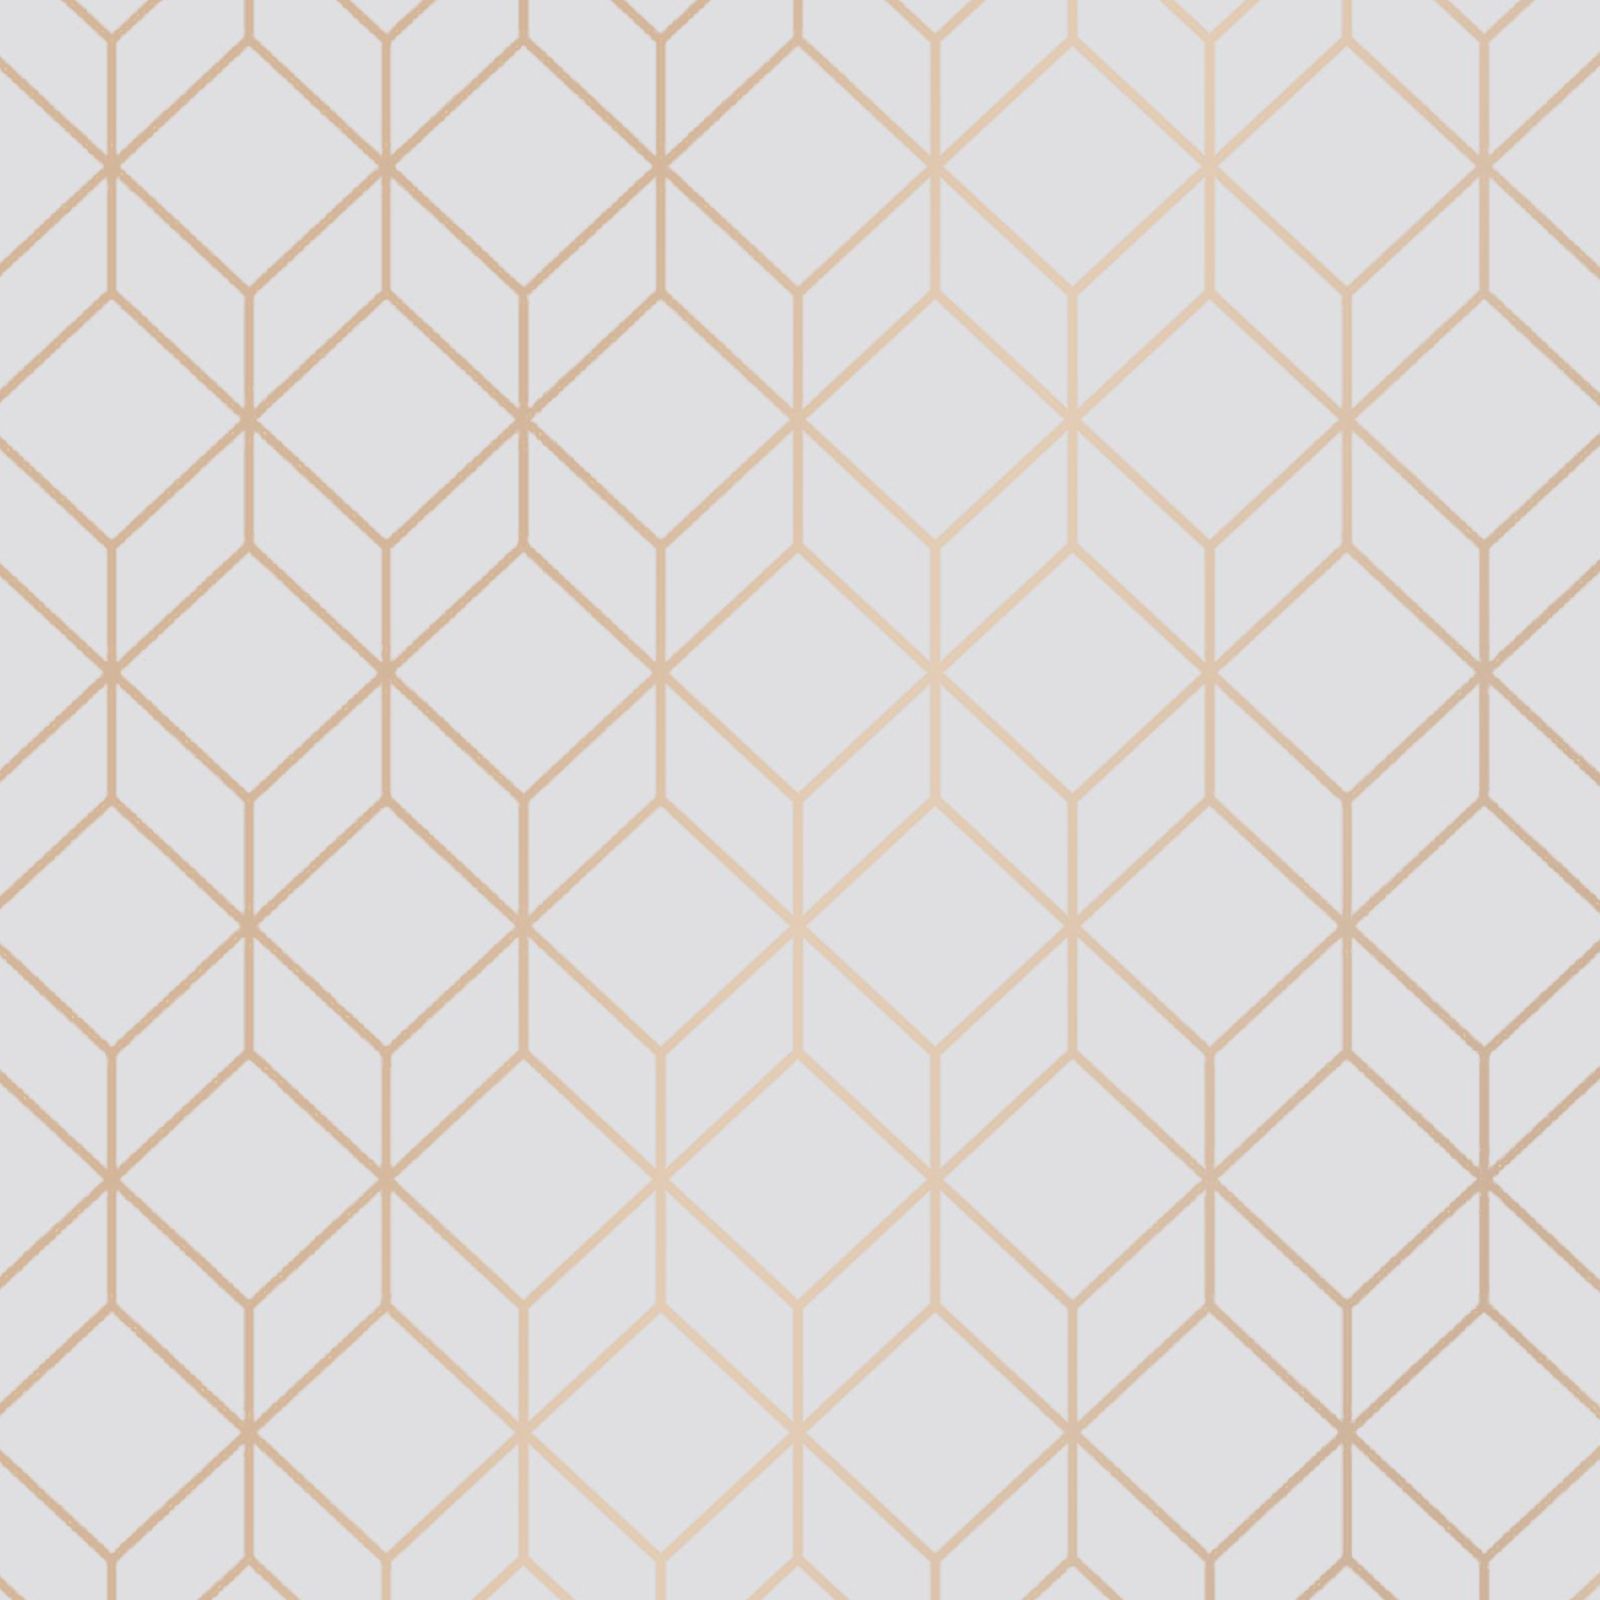 Patterned wallpapers